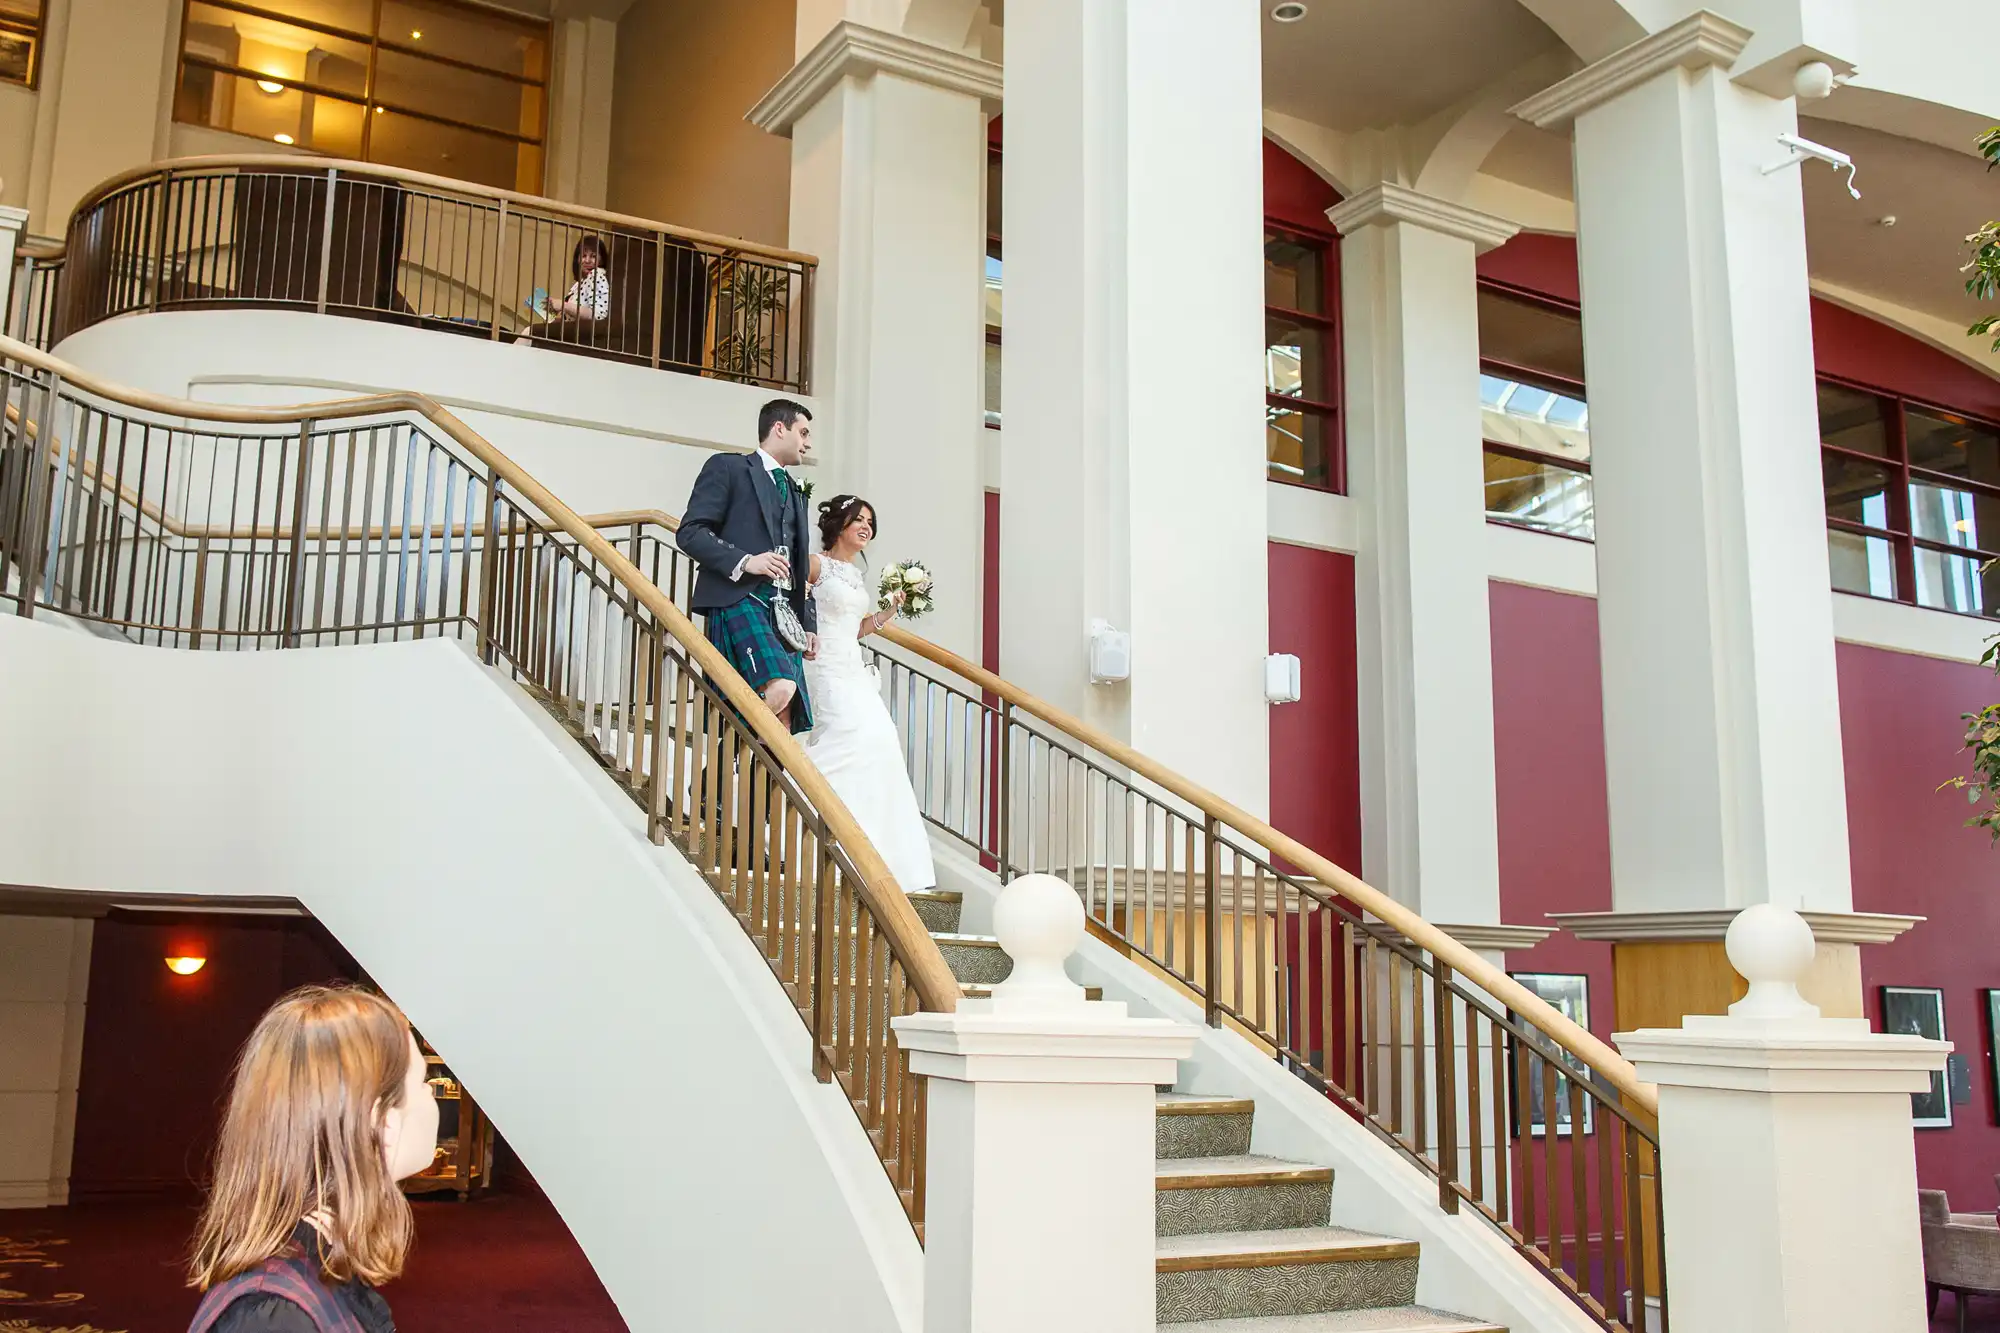 A bride and groom descending a curved staircase in a grand hall, with a guest watching from below.